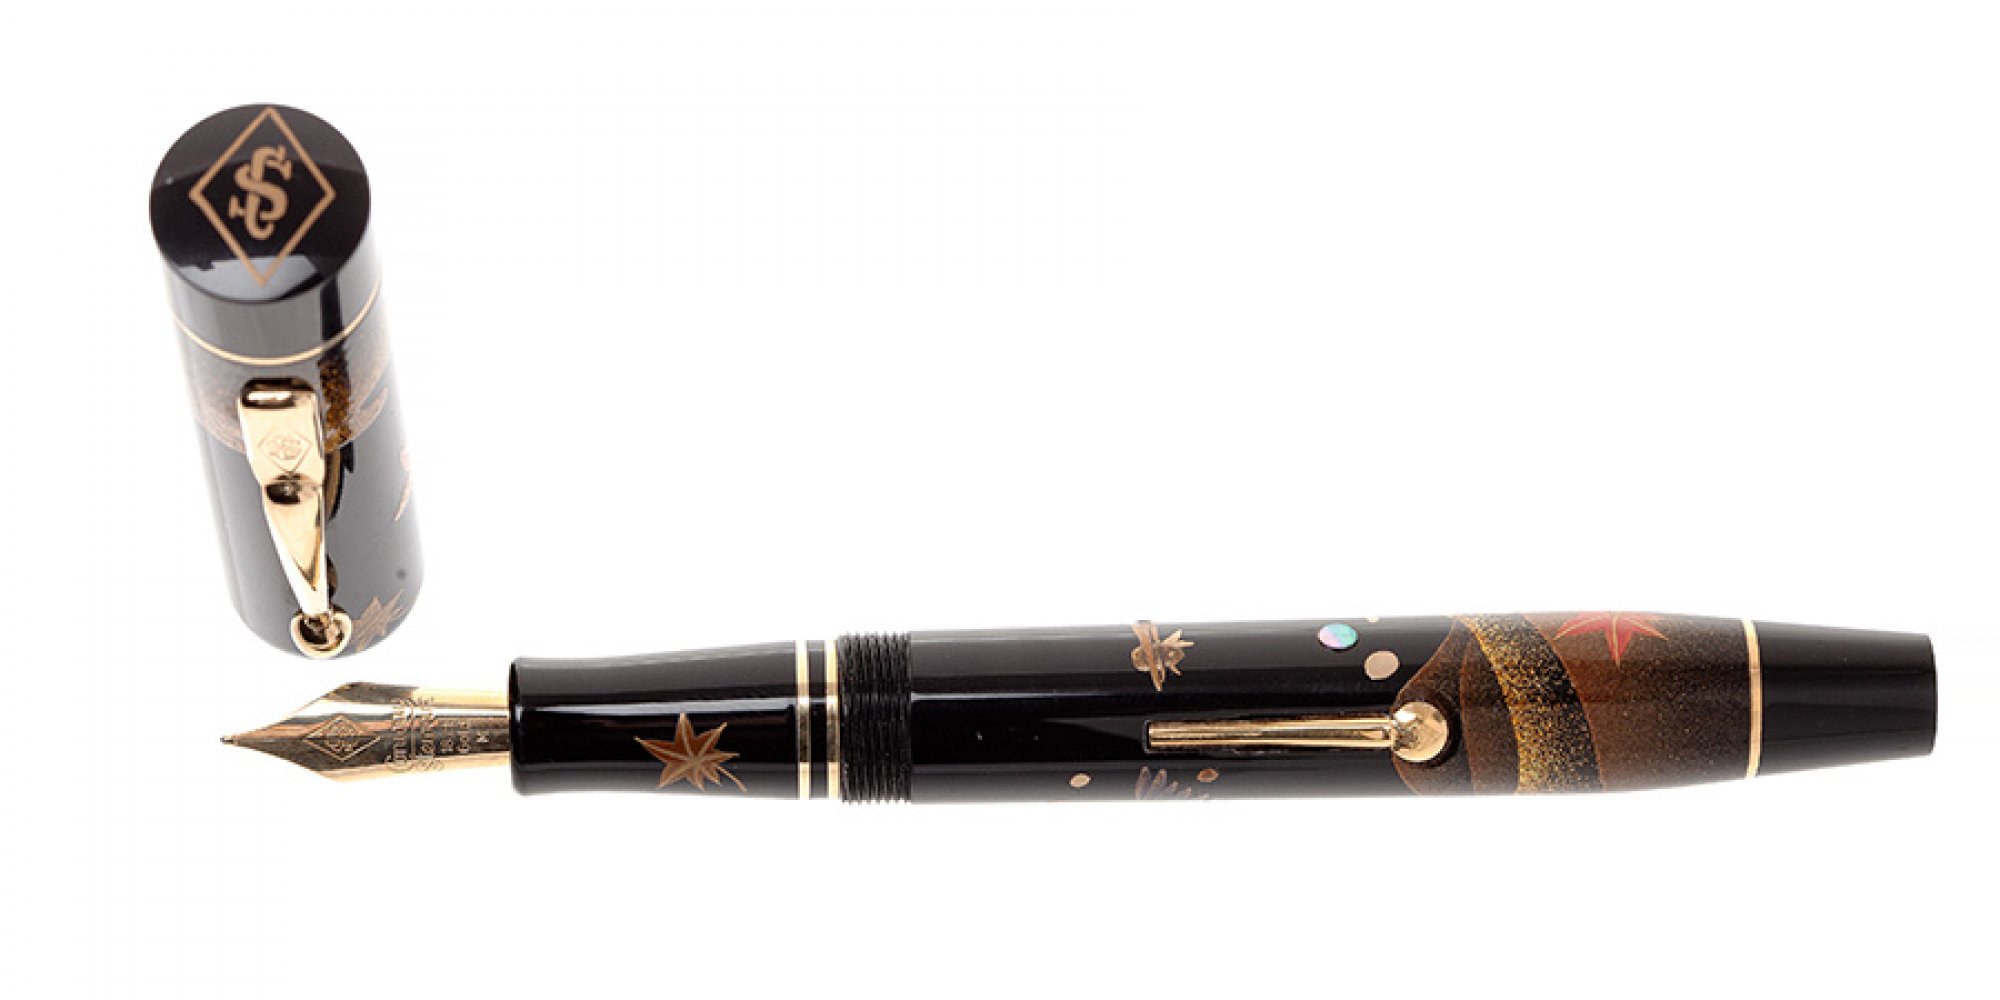 PELIKAN MAKI-E GINKO & MAPLE LEAVES FOUNTAIN PEN, LIMITED EDITION.Barrel in Japanese lacquer and - Image 3 of 3